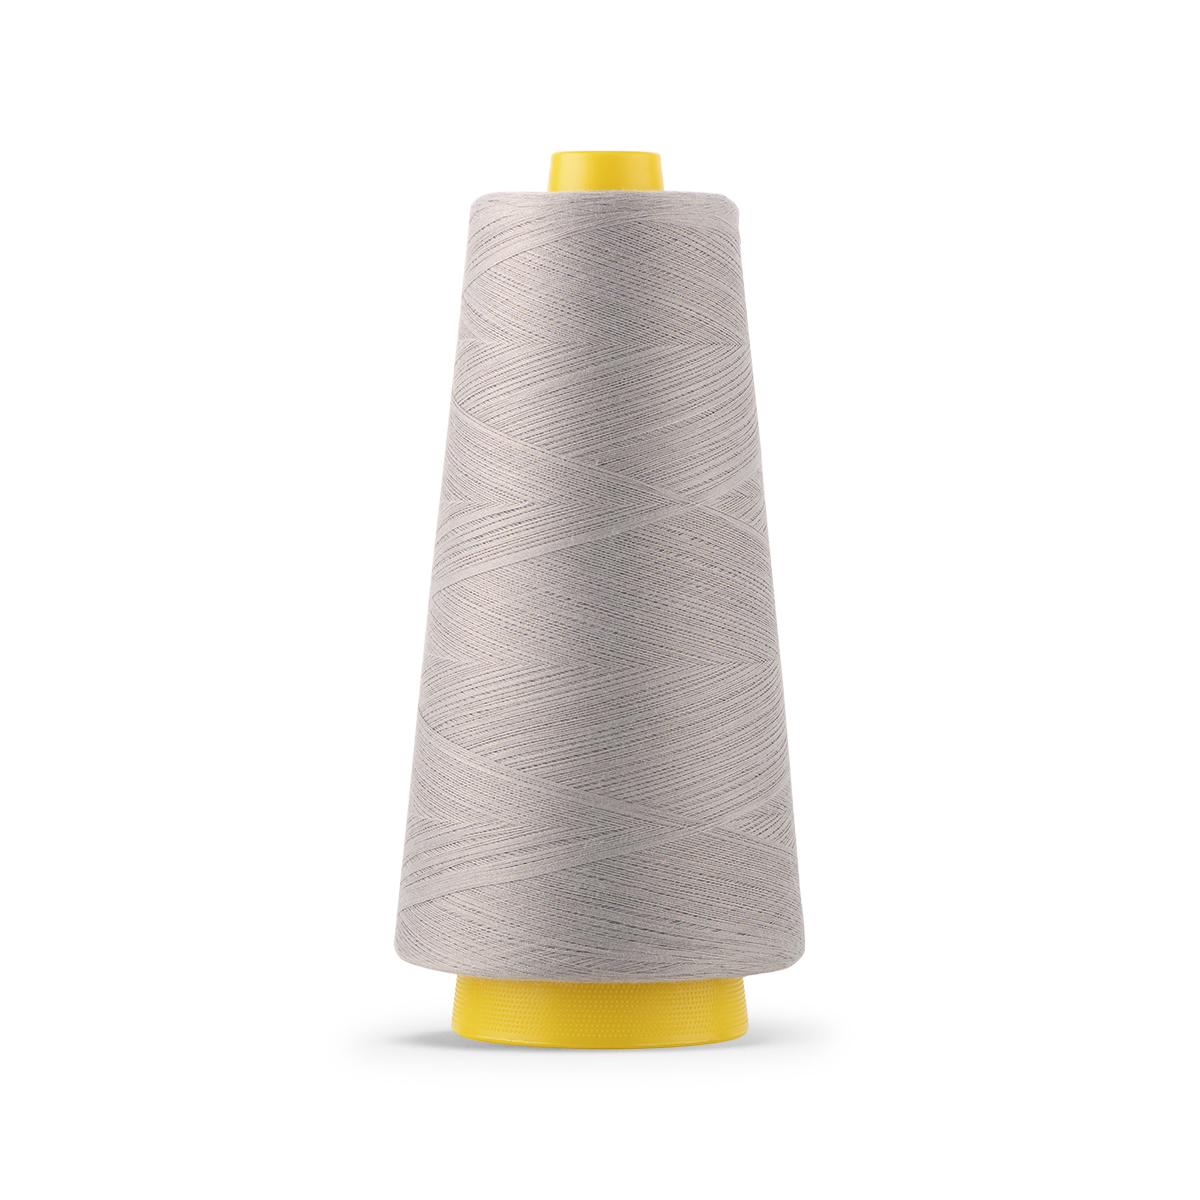 Serger Thread, All-Purpose Thread for Sewing, Yellow Thread, Polyester  Sewing Thread, 4 Cones of 3000 Yards Each Spool Thread for Sewing Machine  Thread